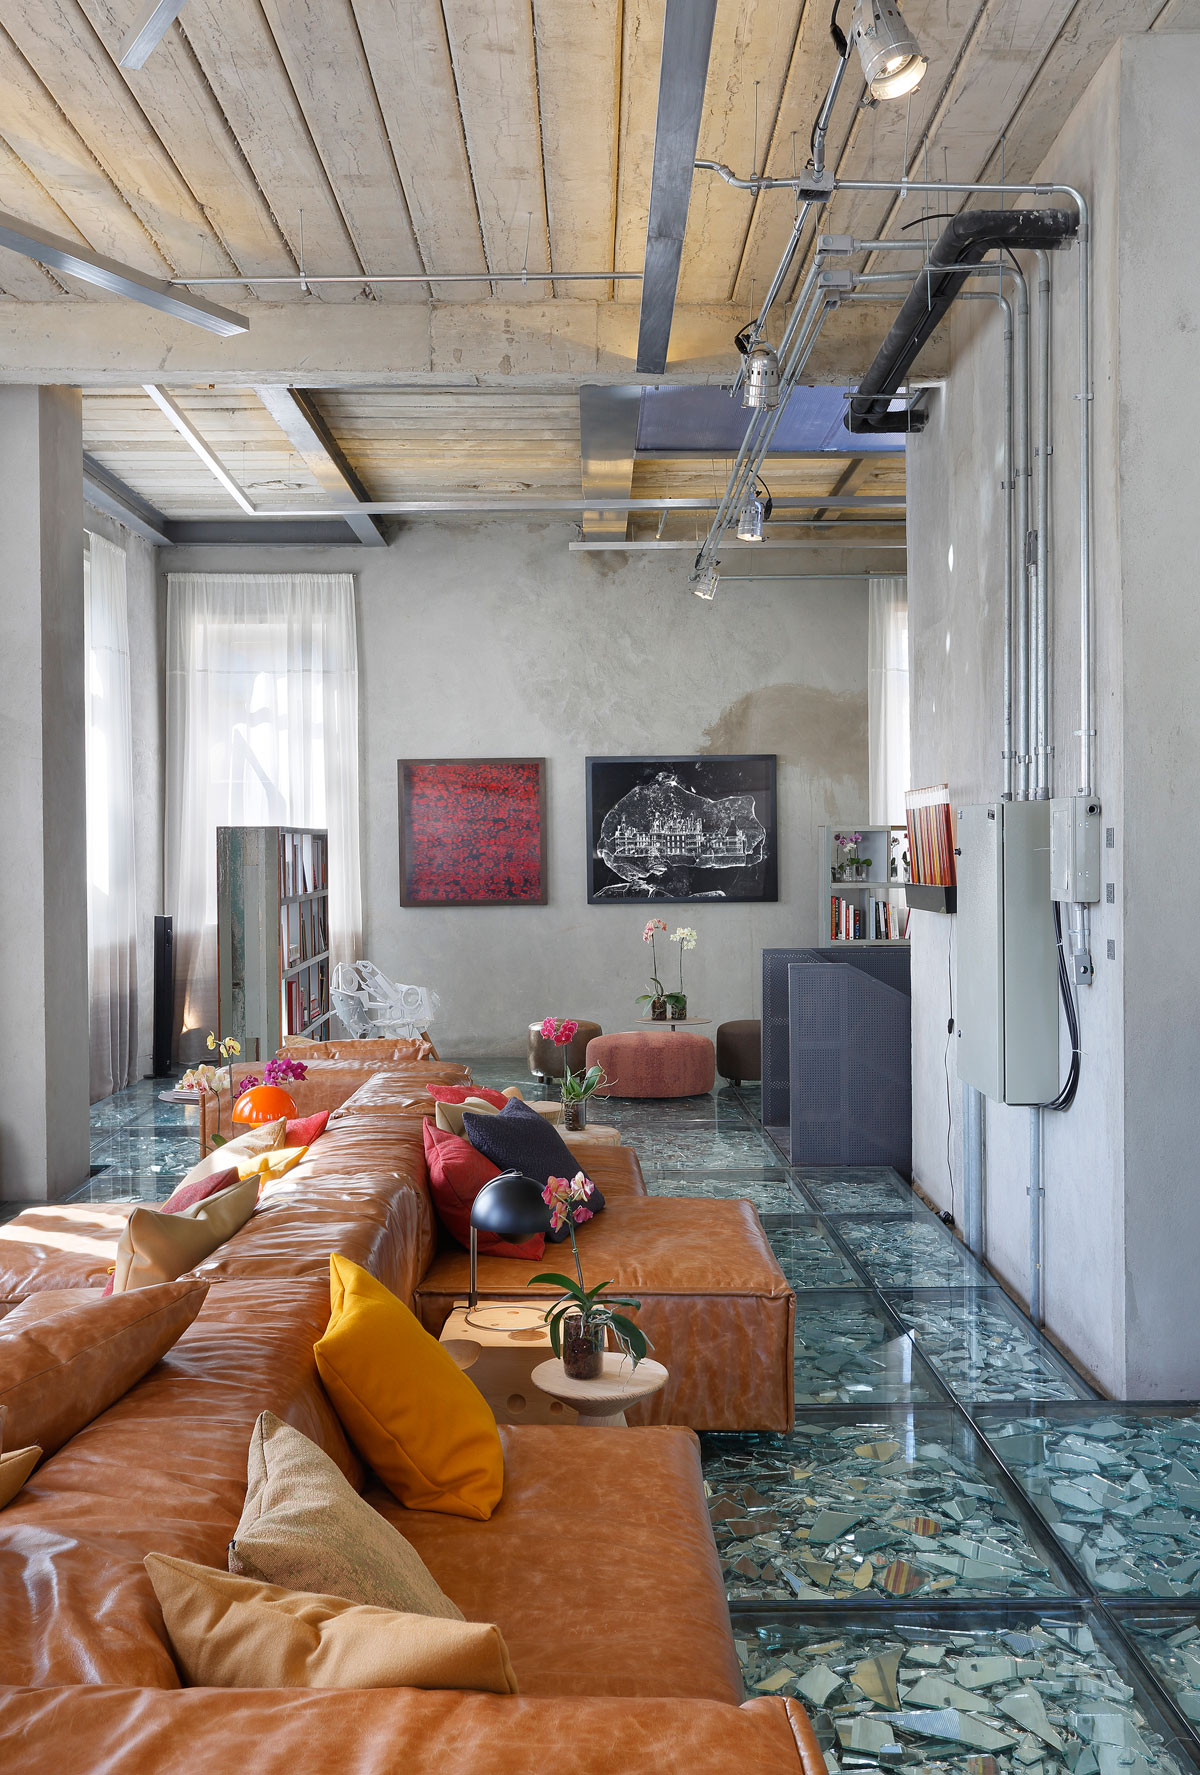 Stylish and Eclectic Design with Broken Glass Floor of Lab LZ for Casa Cor Rio 2015 by Giselle Taranto Architecture-11